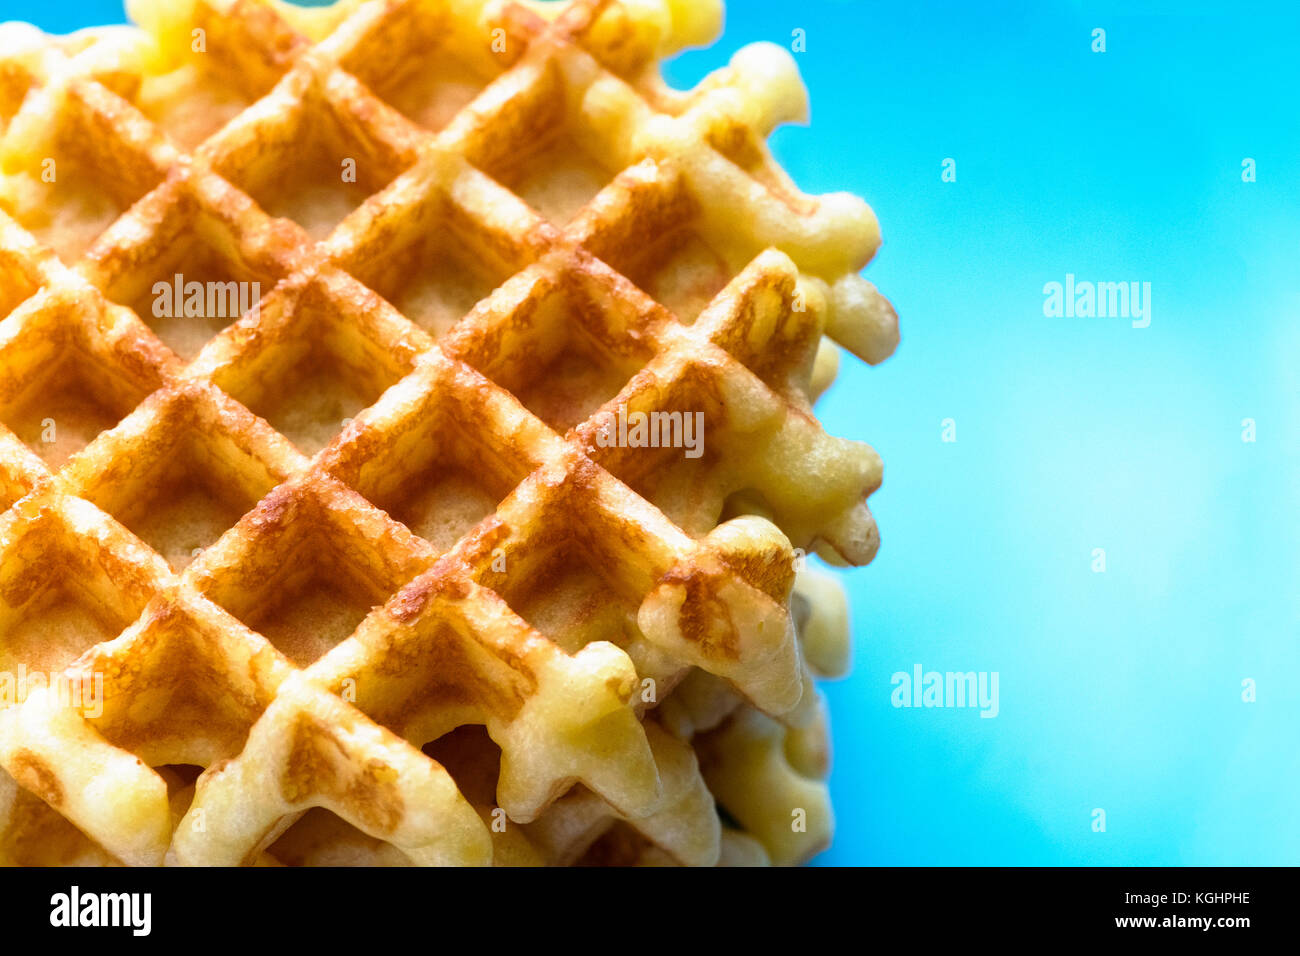 overview of a fleshly baked Belgium waffles showing a blue background for copy space such as menus, recipes and text Stock Photo